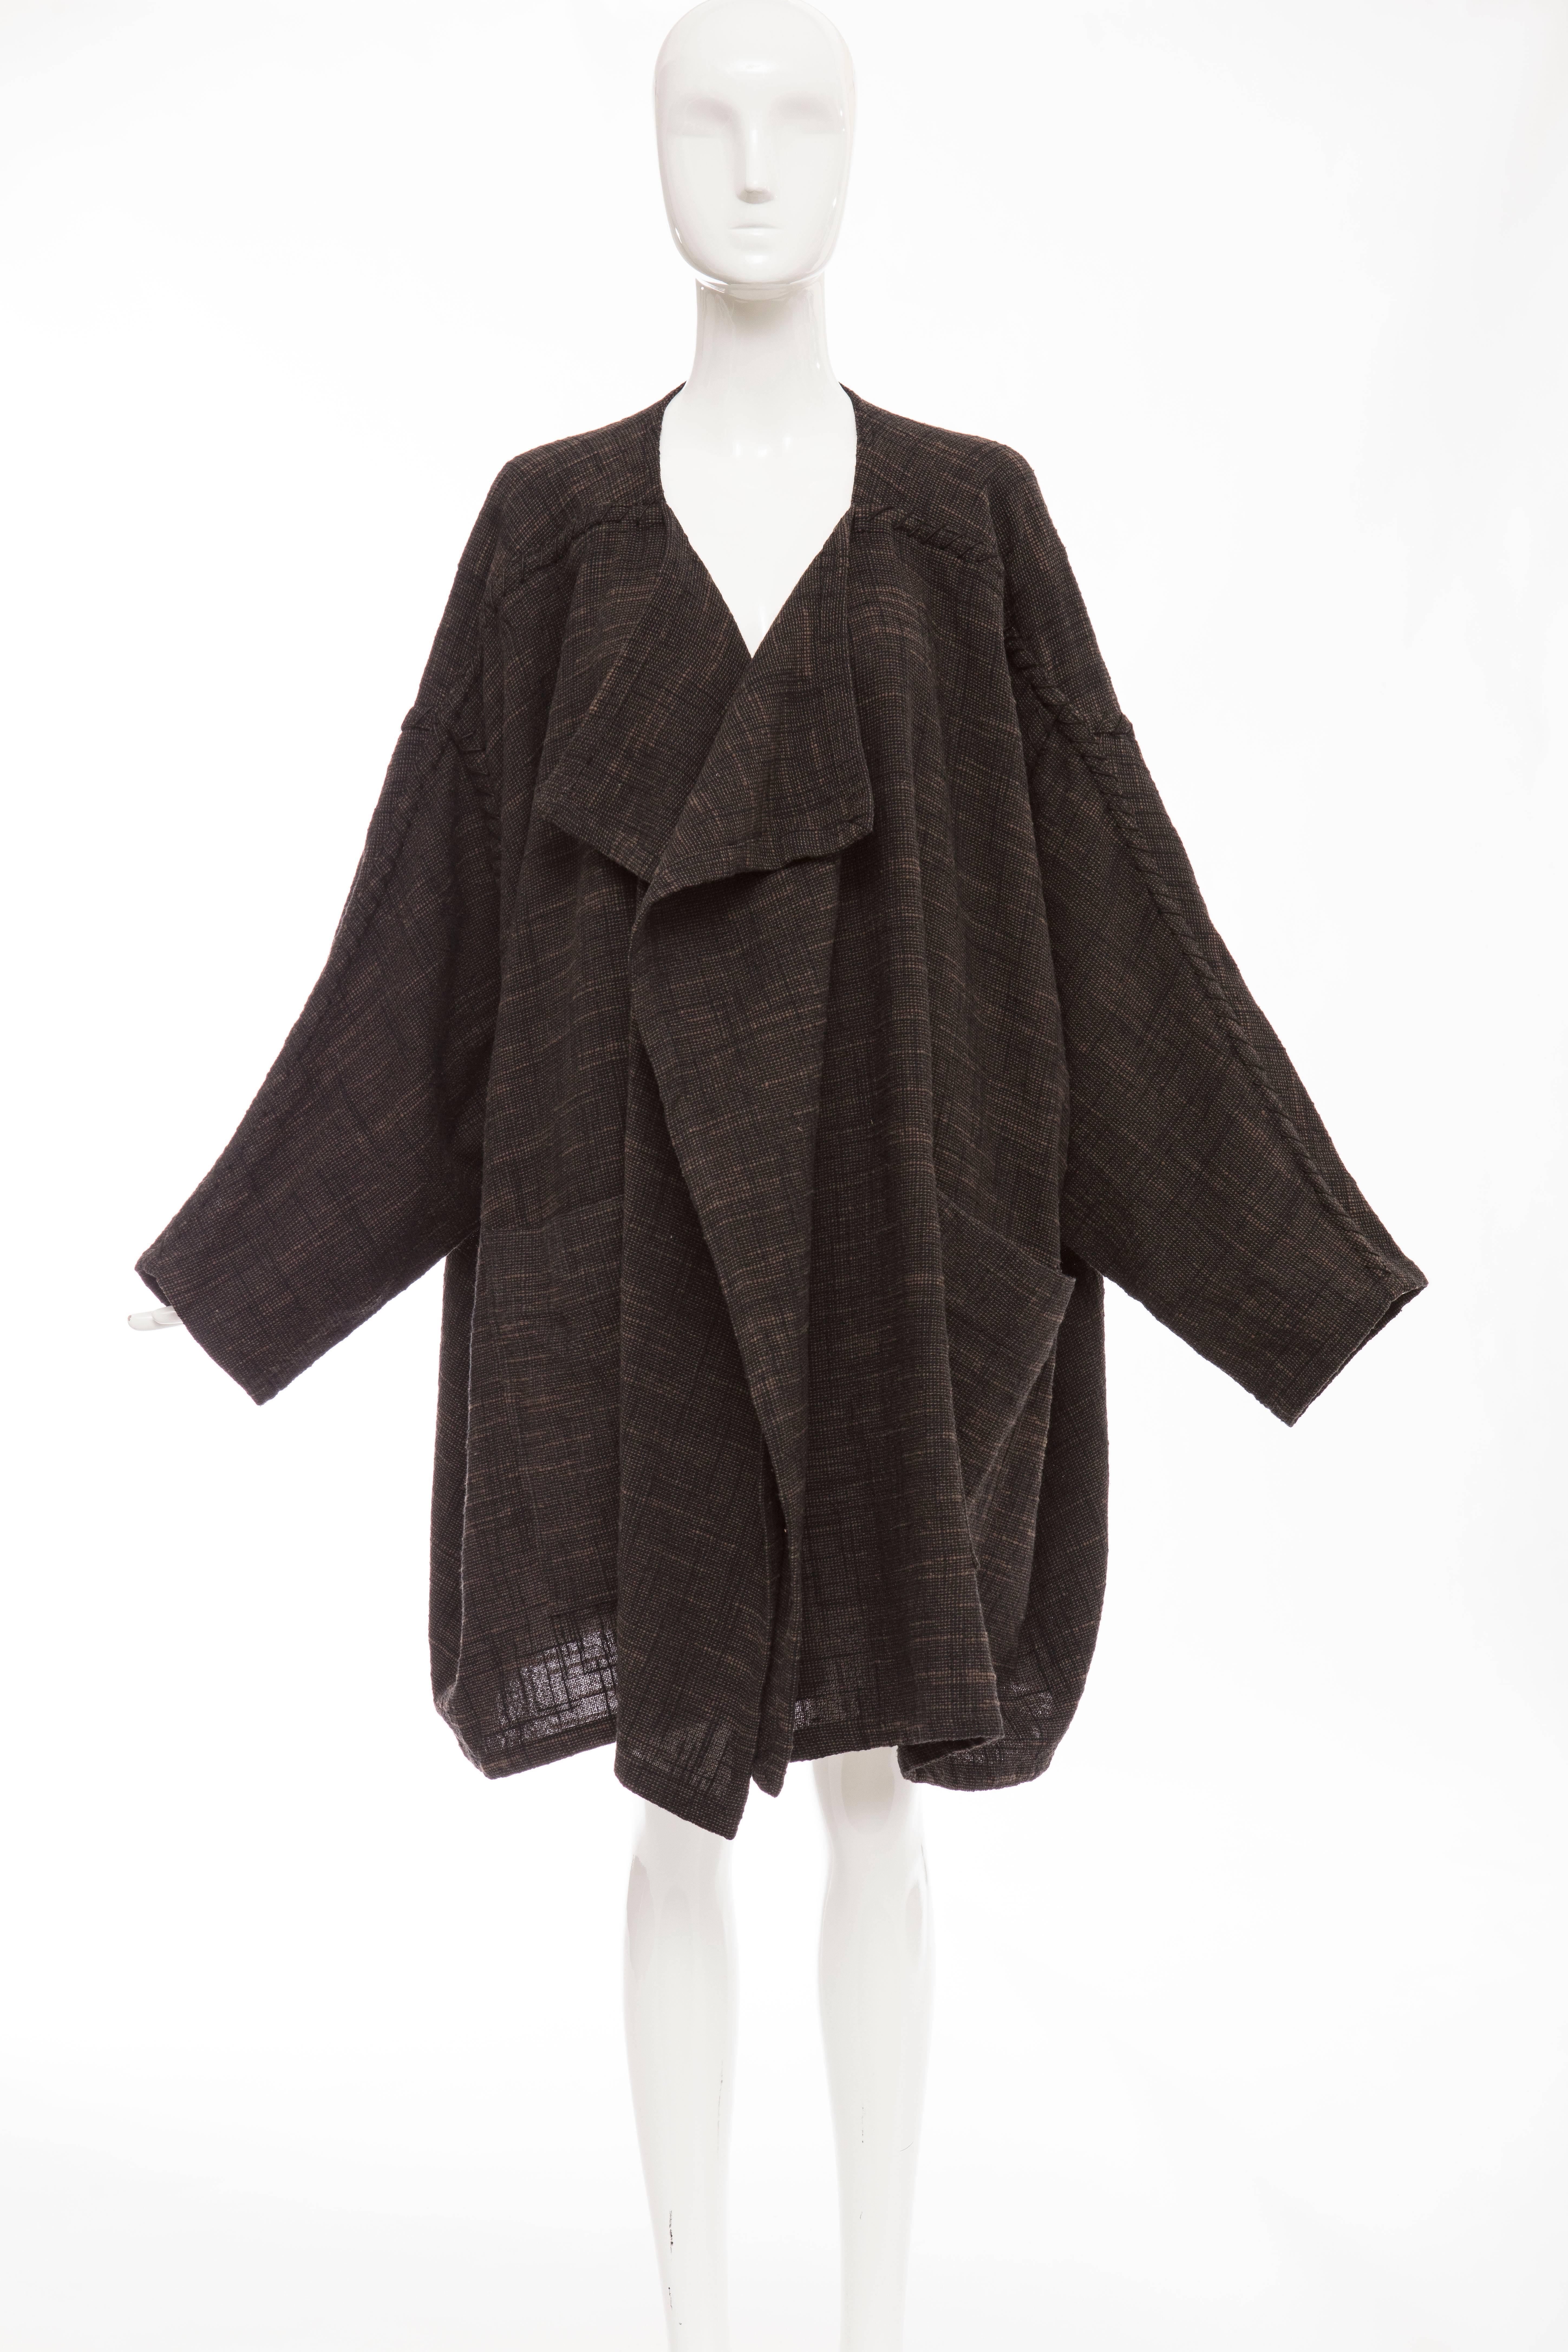 Issey Miyake Plantation, circa 1980's wool cotton nylon woven navy blue brown oversized draped jacket, shoulder sleeve black cording detail with two large deep patch front pockets.

Japan: Medium

Bust 76, Waist 76, Hips 76, Length 36